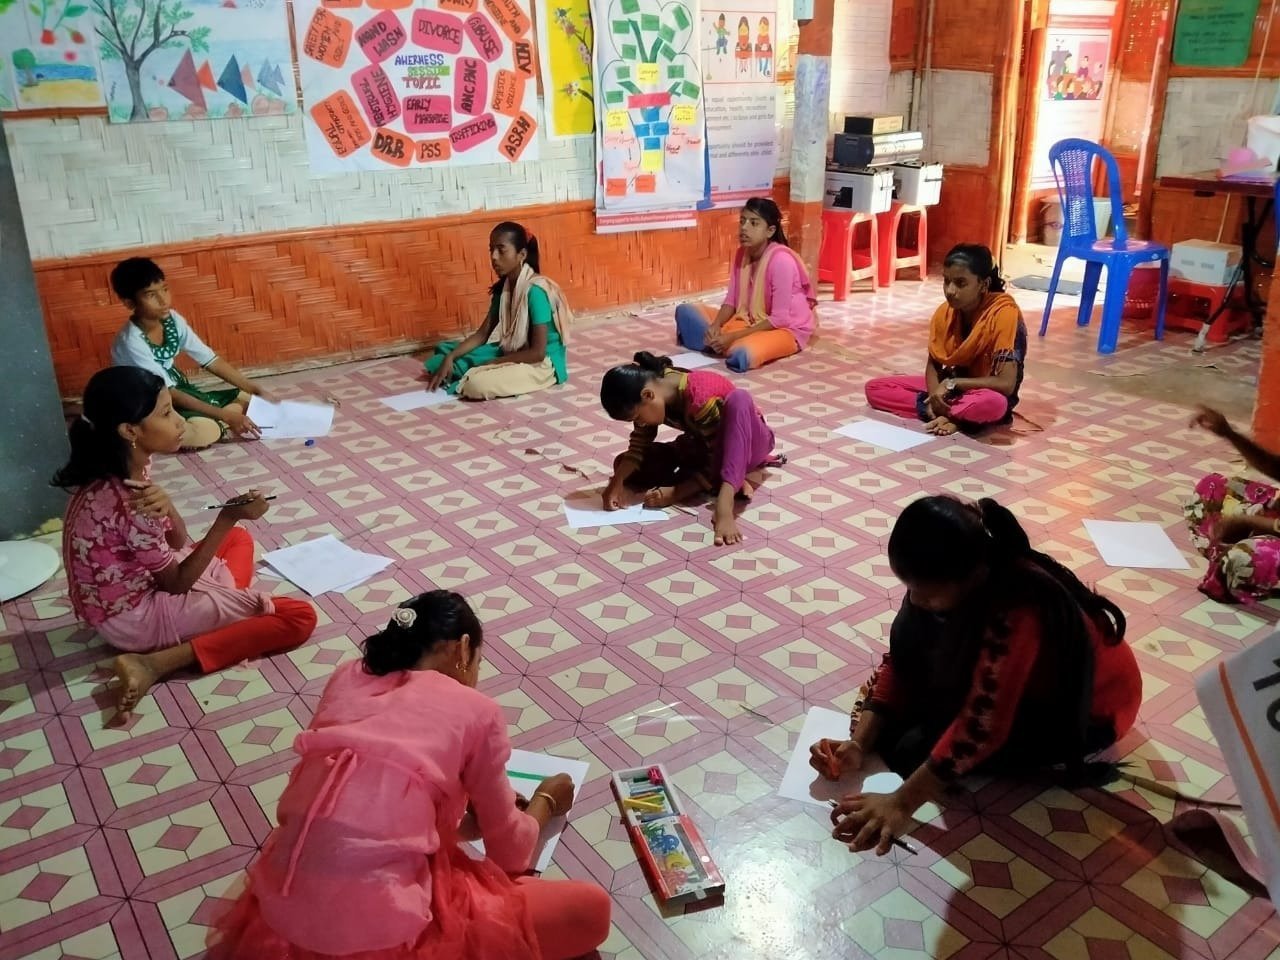 Girls participate in a drawing session at the Women and Girls' safe space in Cox's Bazar refugee camp, Bangladesh